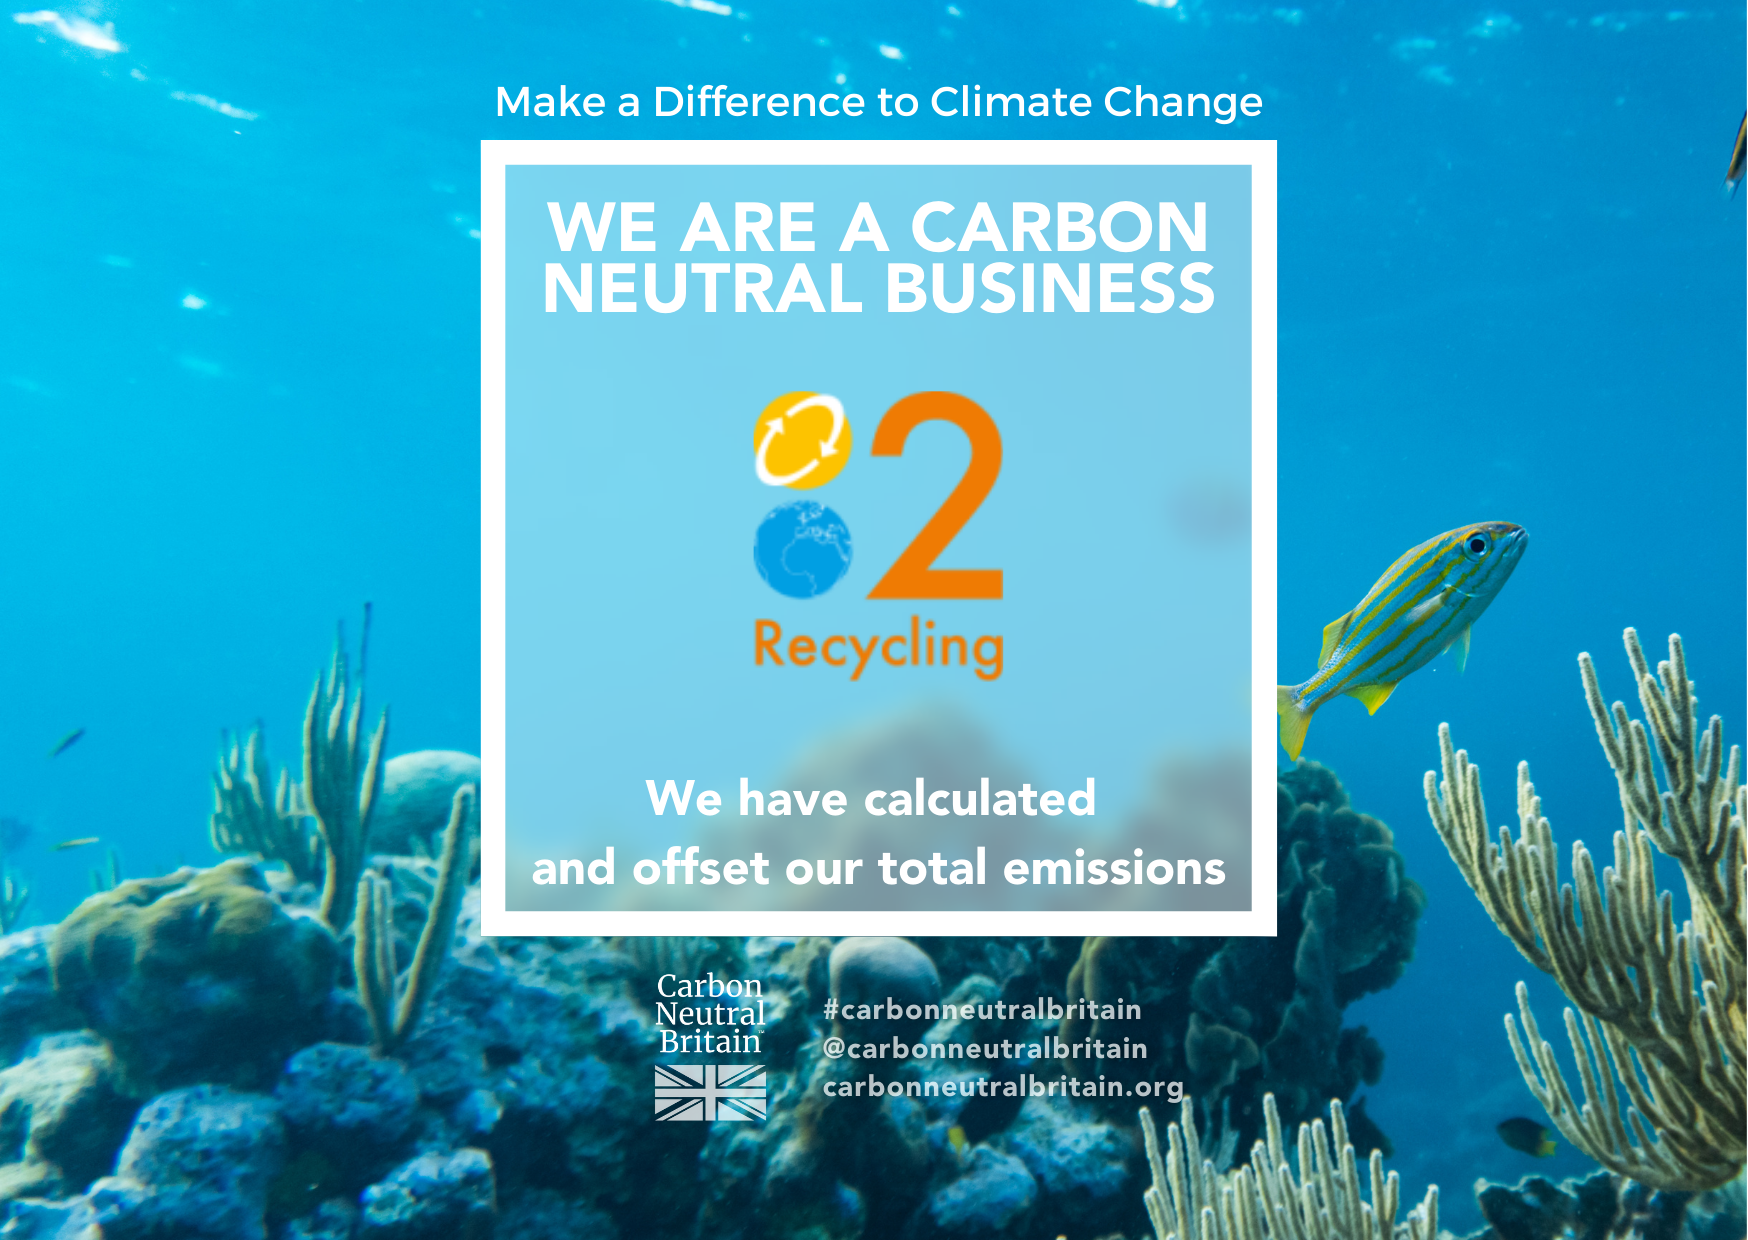 2 Recycling is now Carbon Neutral for the third year running.